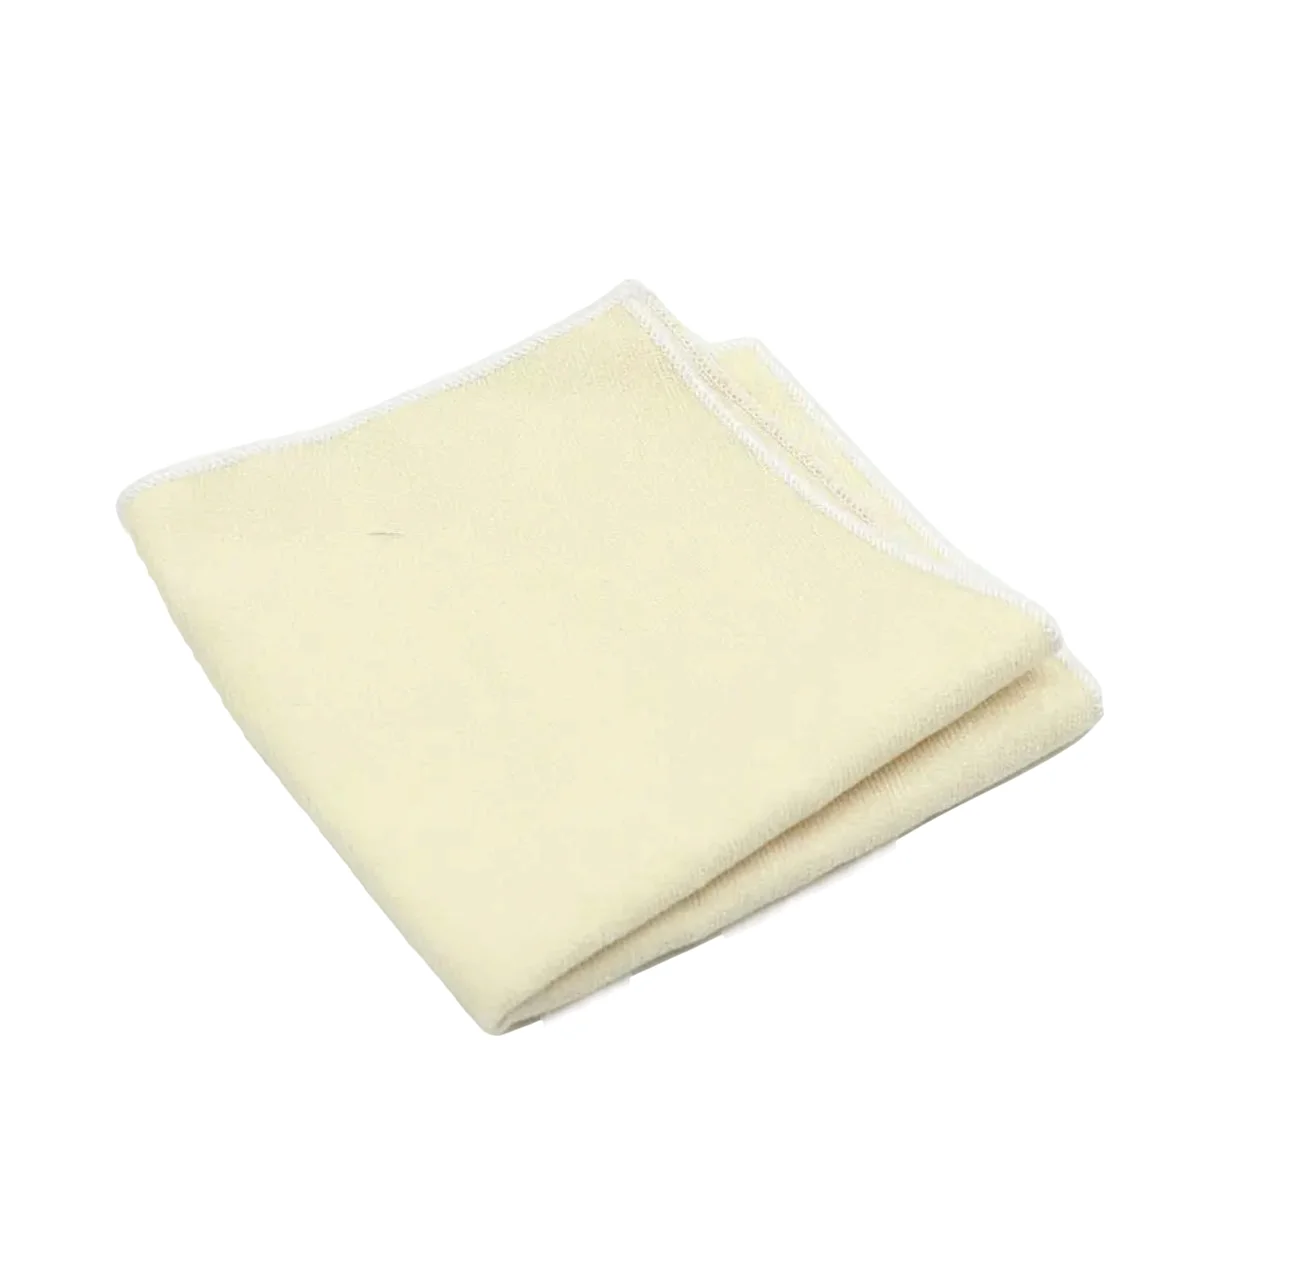 Cream Pocket square for Men is great for Weddings and Events. Elegant Handkerchief for parties and gift for suit pockets. Trendy color groom groomsmen